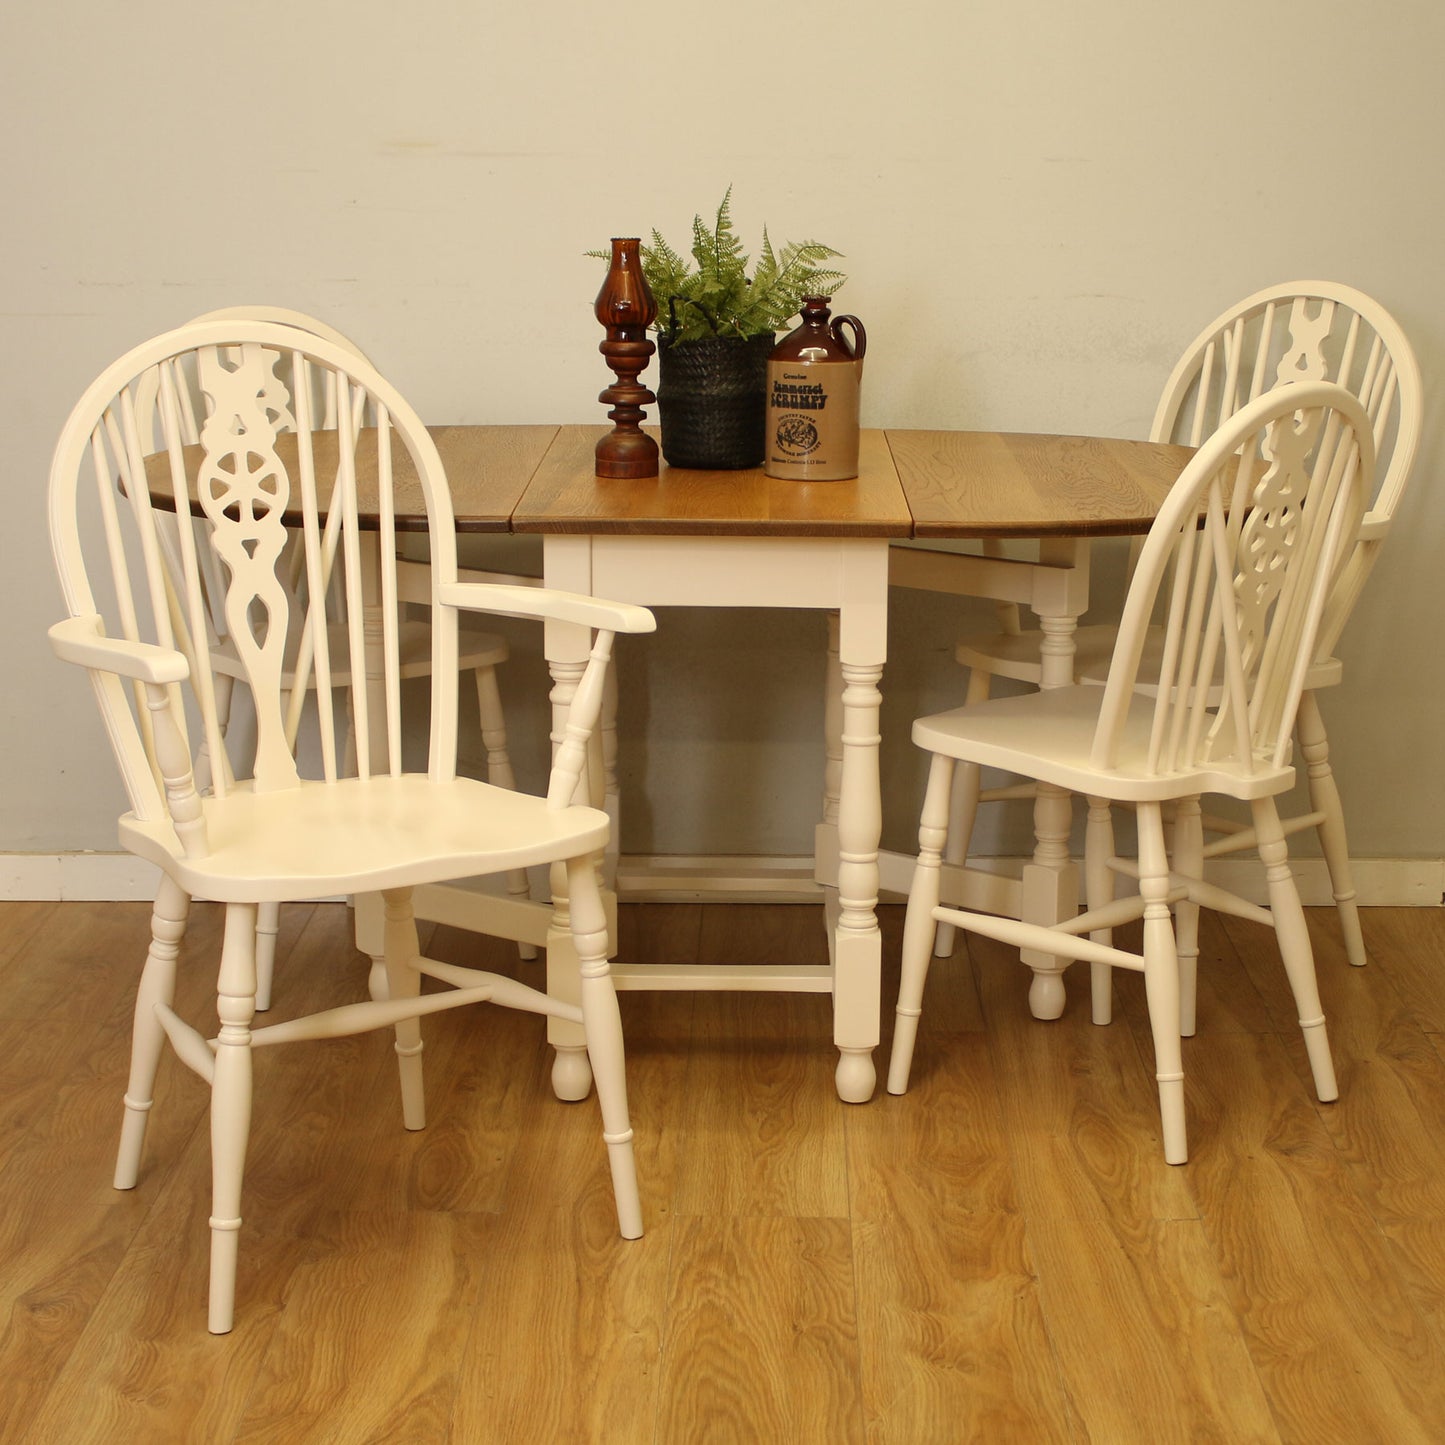 Painted Oak Drop-Leaf Table and Four Chairs